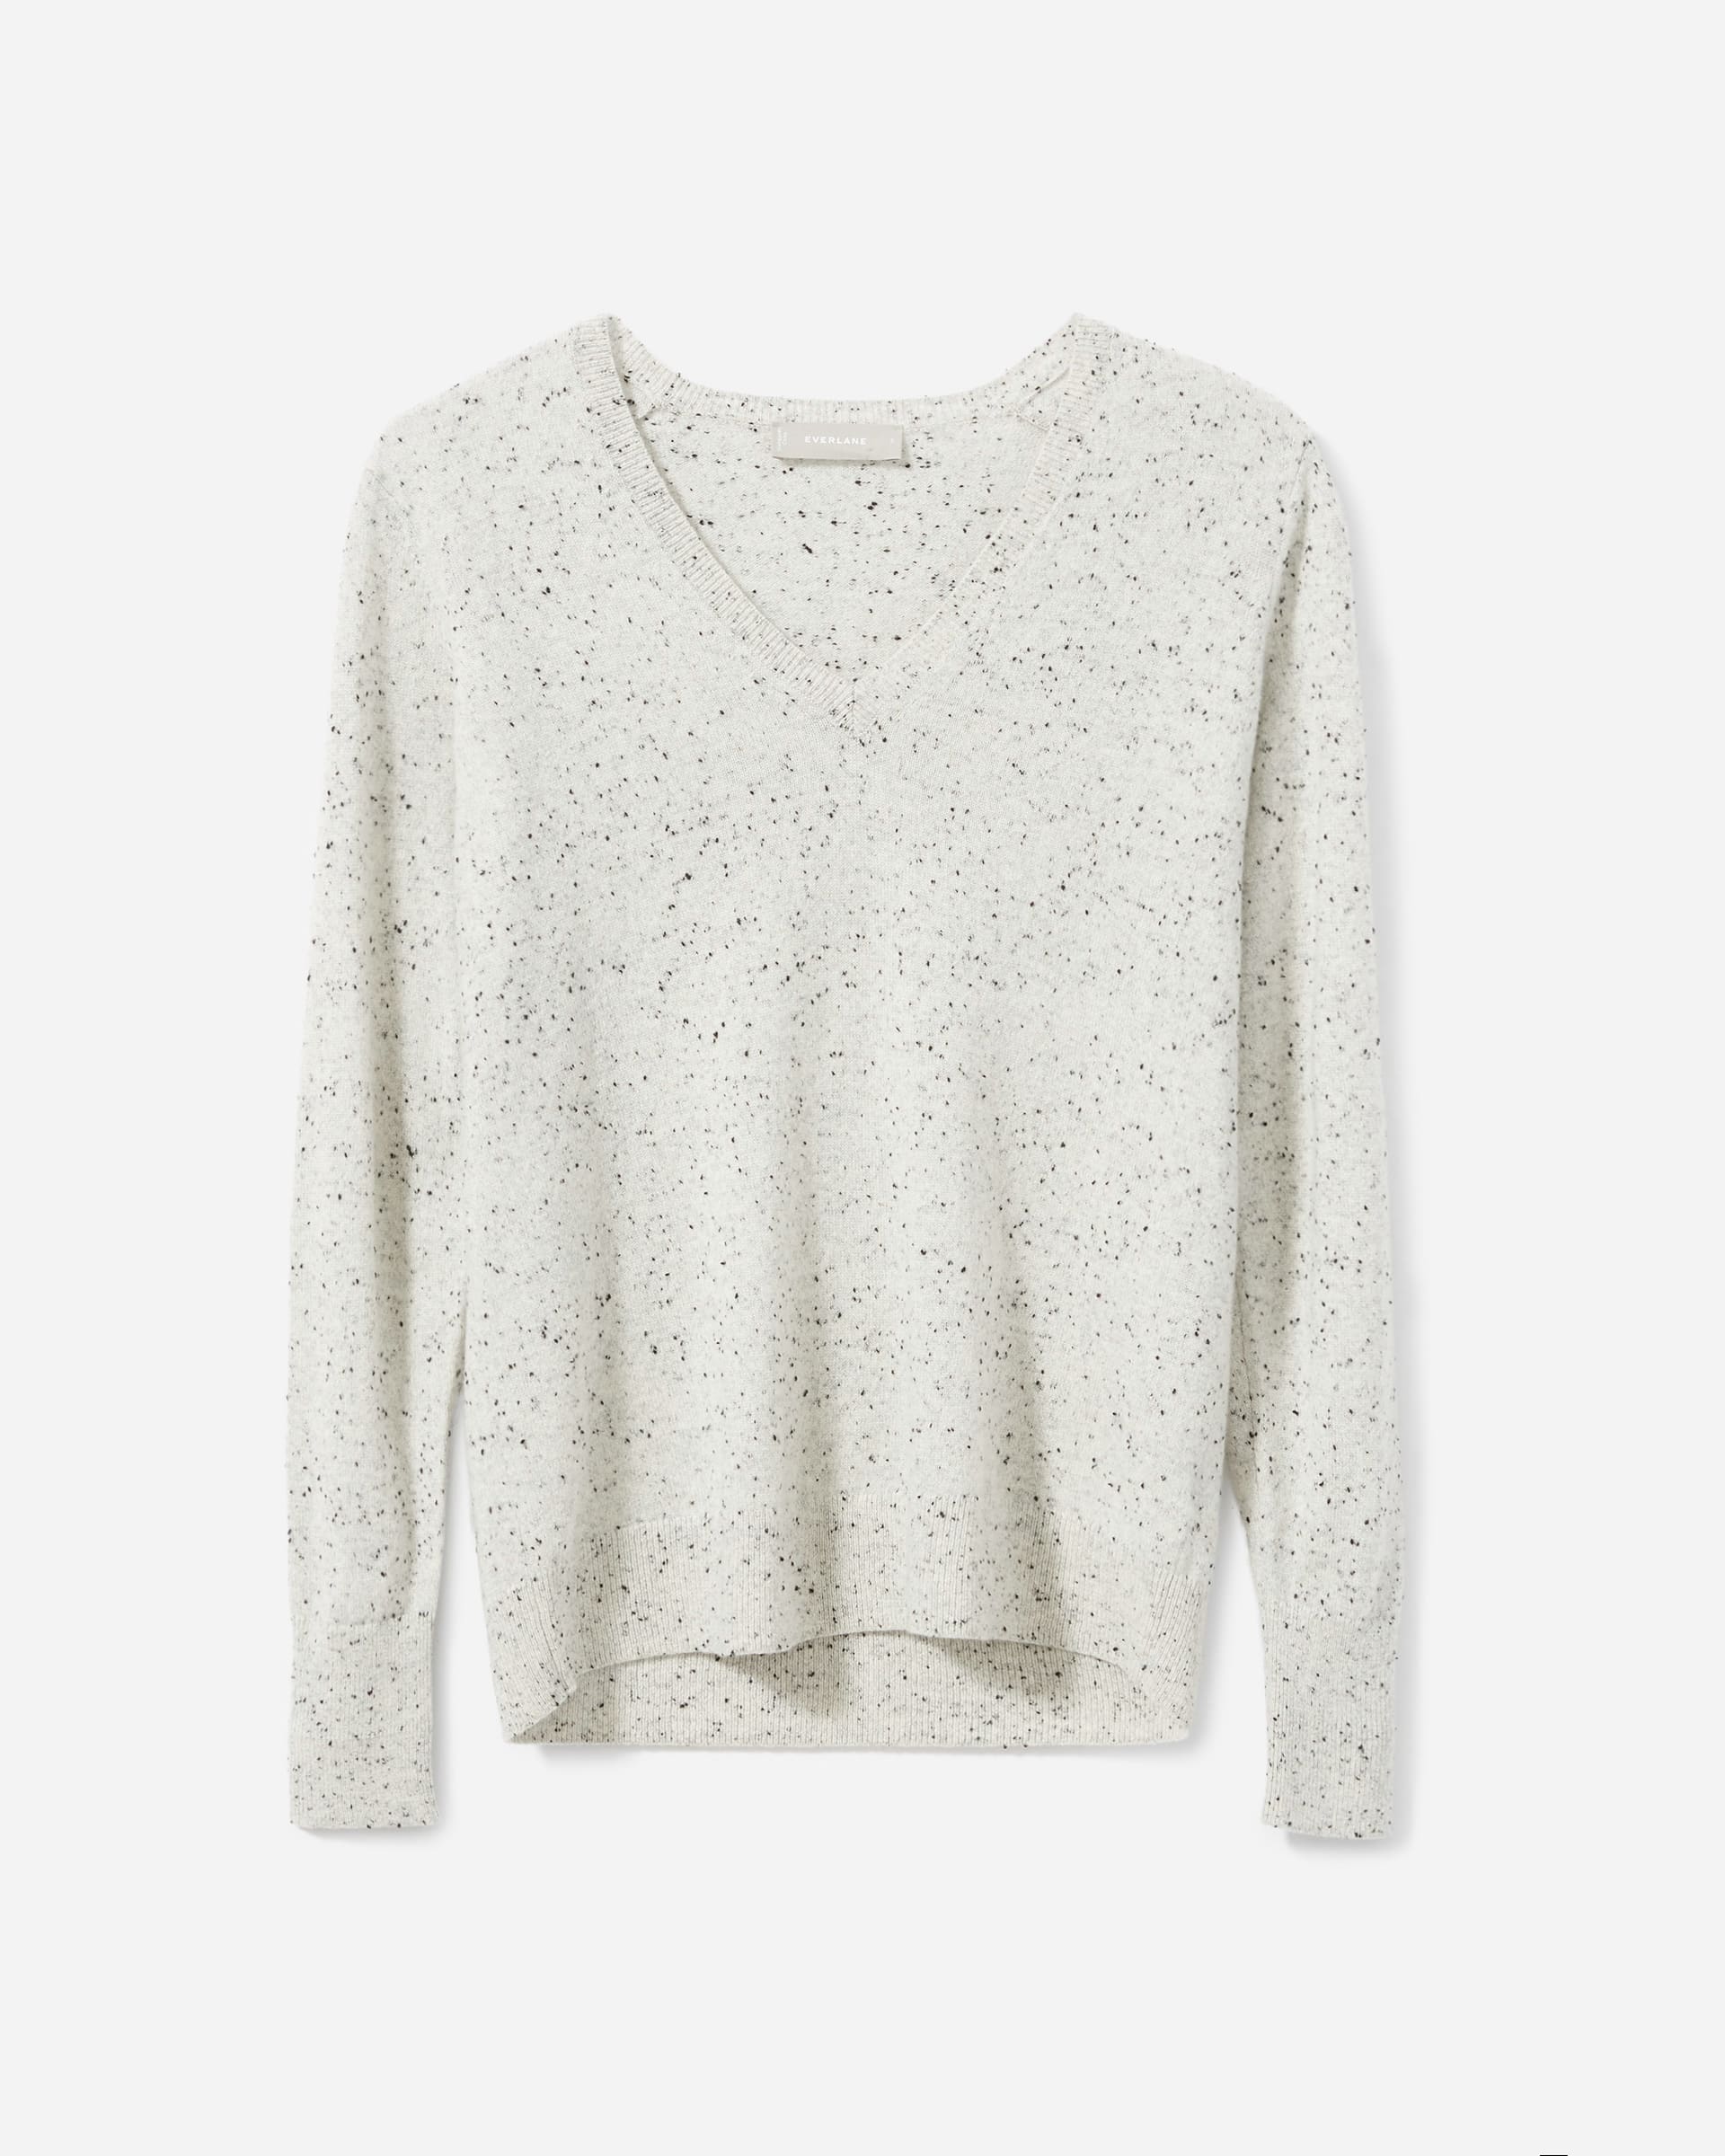 The Cashmere V-Neck Frost Donegal – Everlane